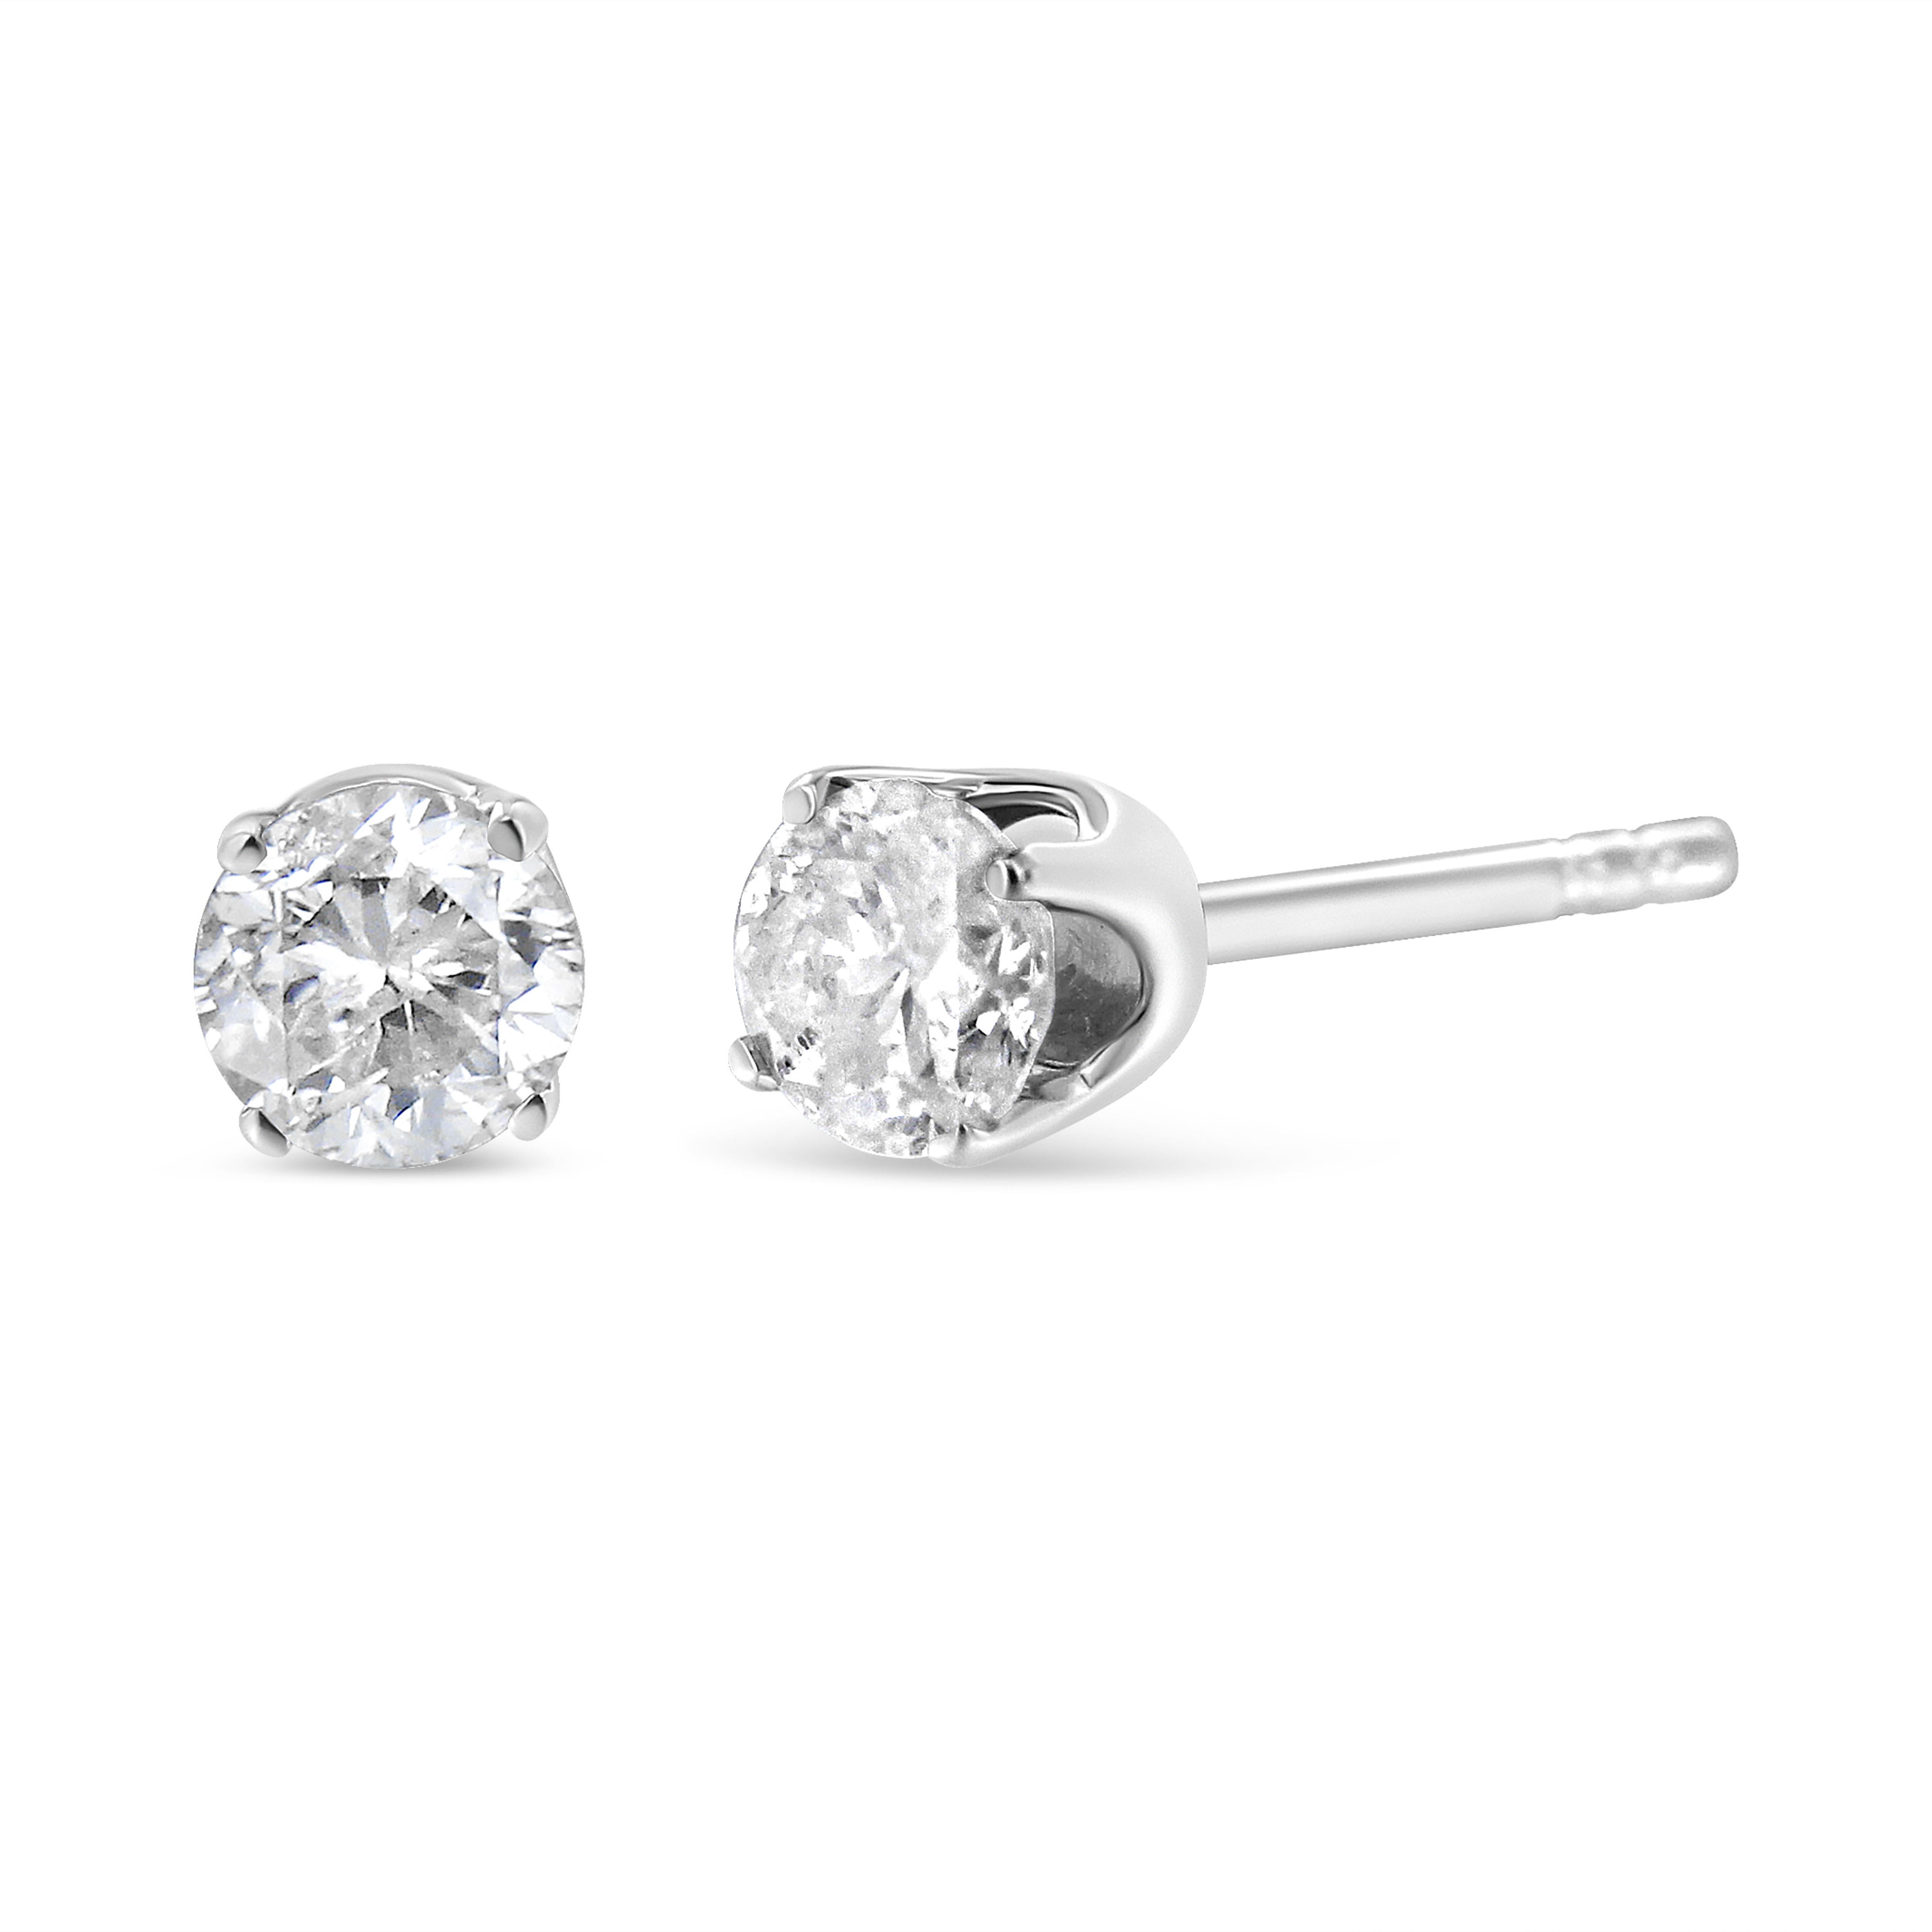 14K White Gold 1.0 Carat Diamond Solitaire Stud Earrings In New Condition For Sale In New York, NY